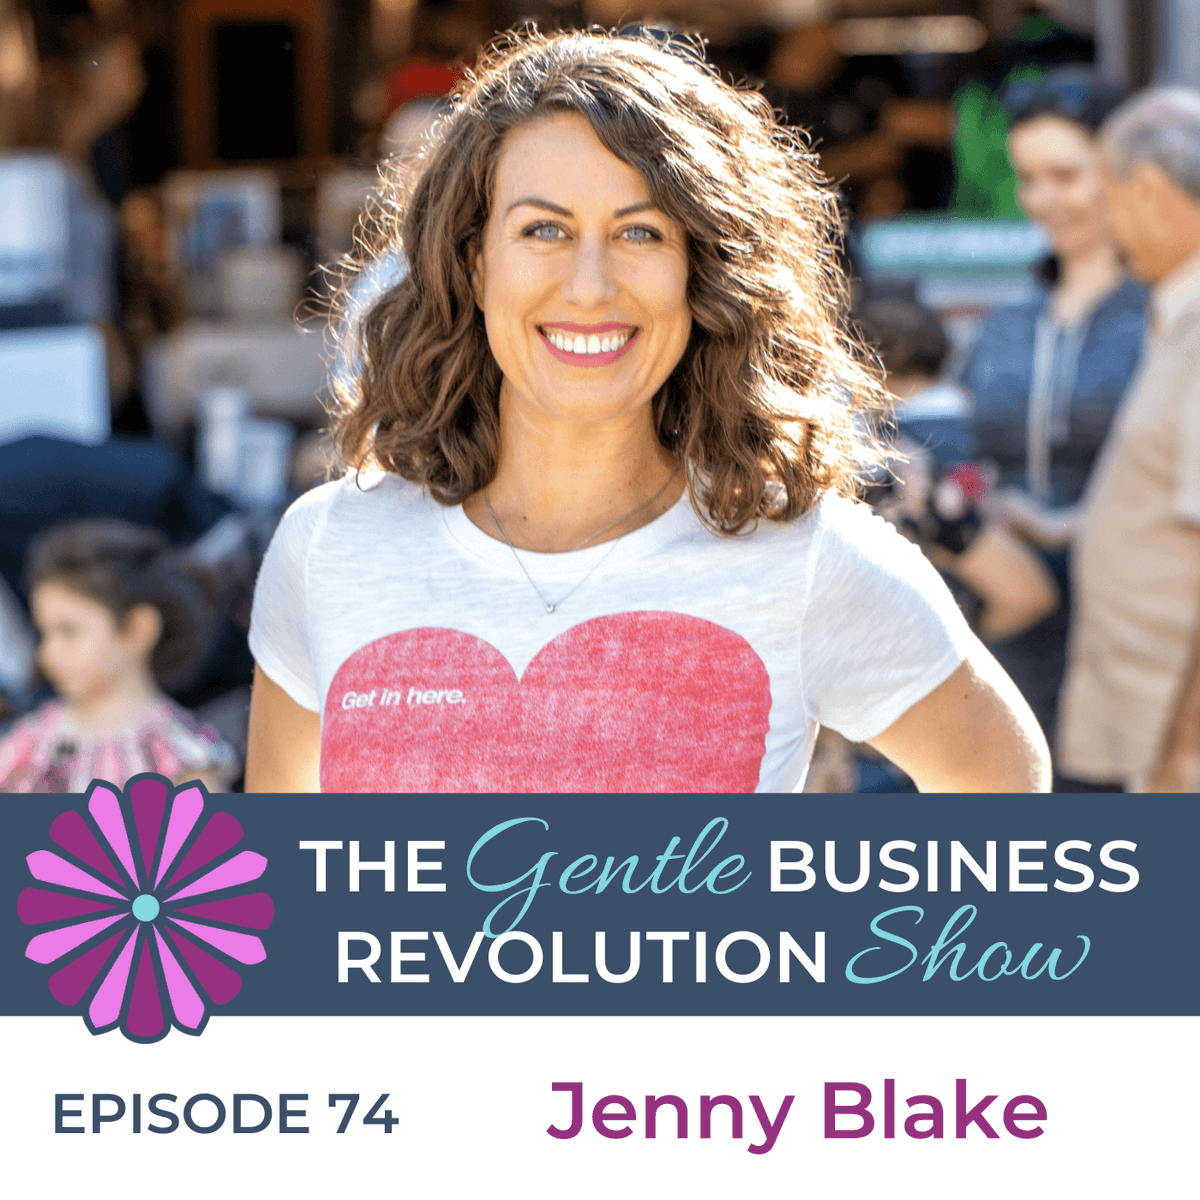 Do you have boundaries in your business for what you will do and what you won't do? In this #GentleBusinessRevolution episode with @jenny_blake, we are discussing the importance of setting strong boundaries in your business. https://t.co/51qT1IjQng https://t.co/QwD1VZIlsS